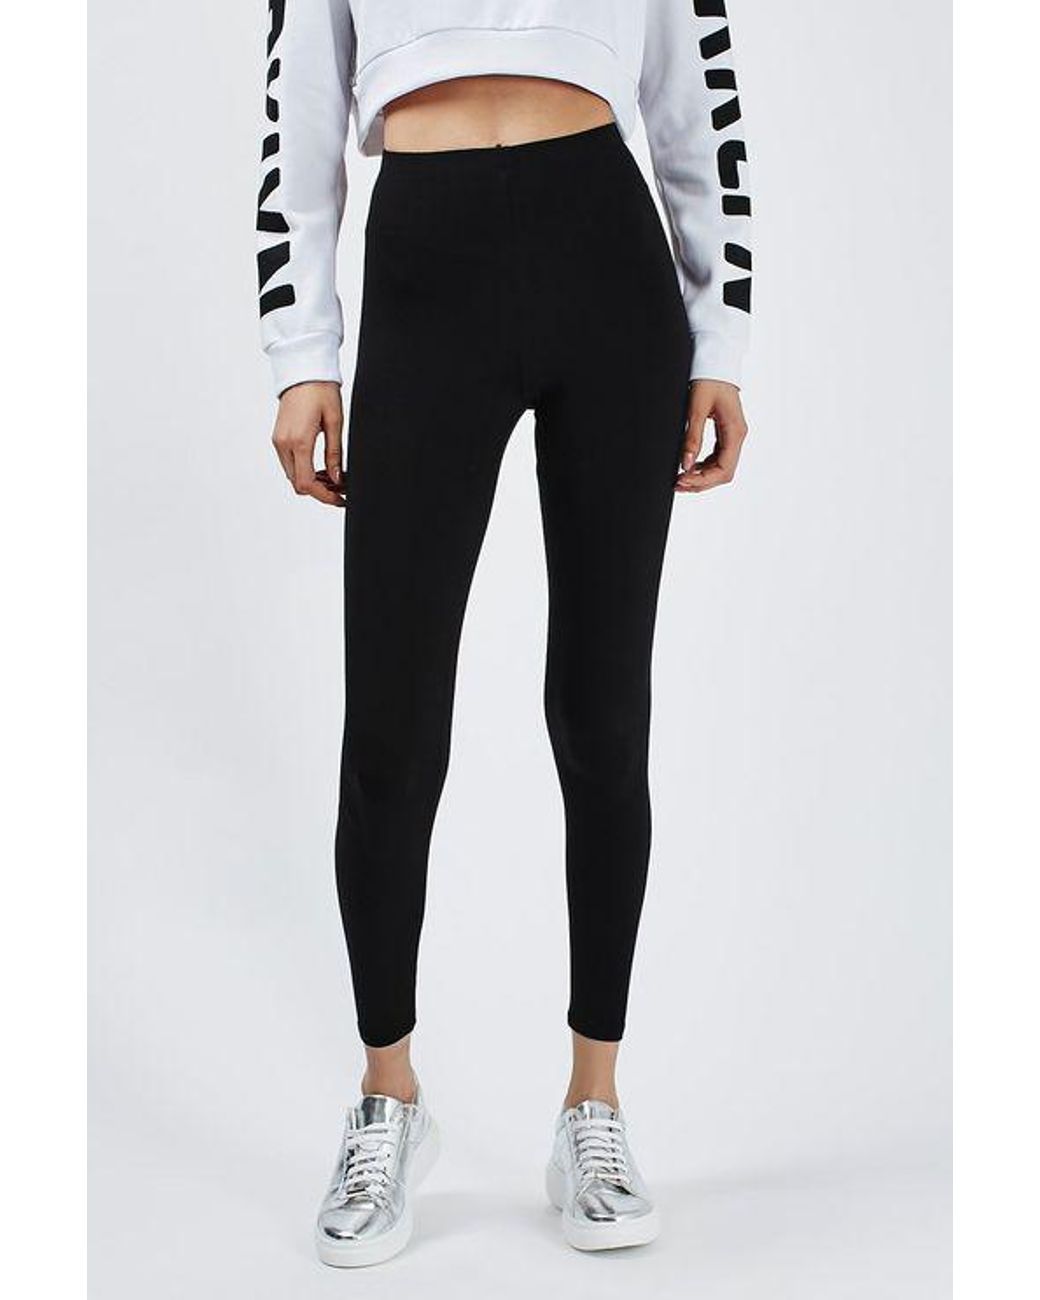 TOPSHOP Synthetic New Ankle Length Leggings in Black - Lyst